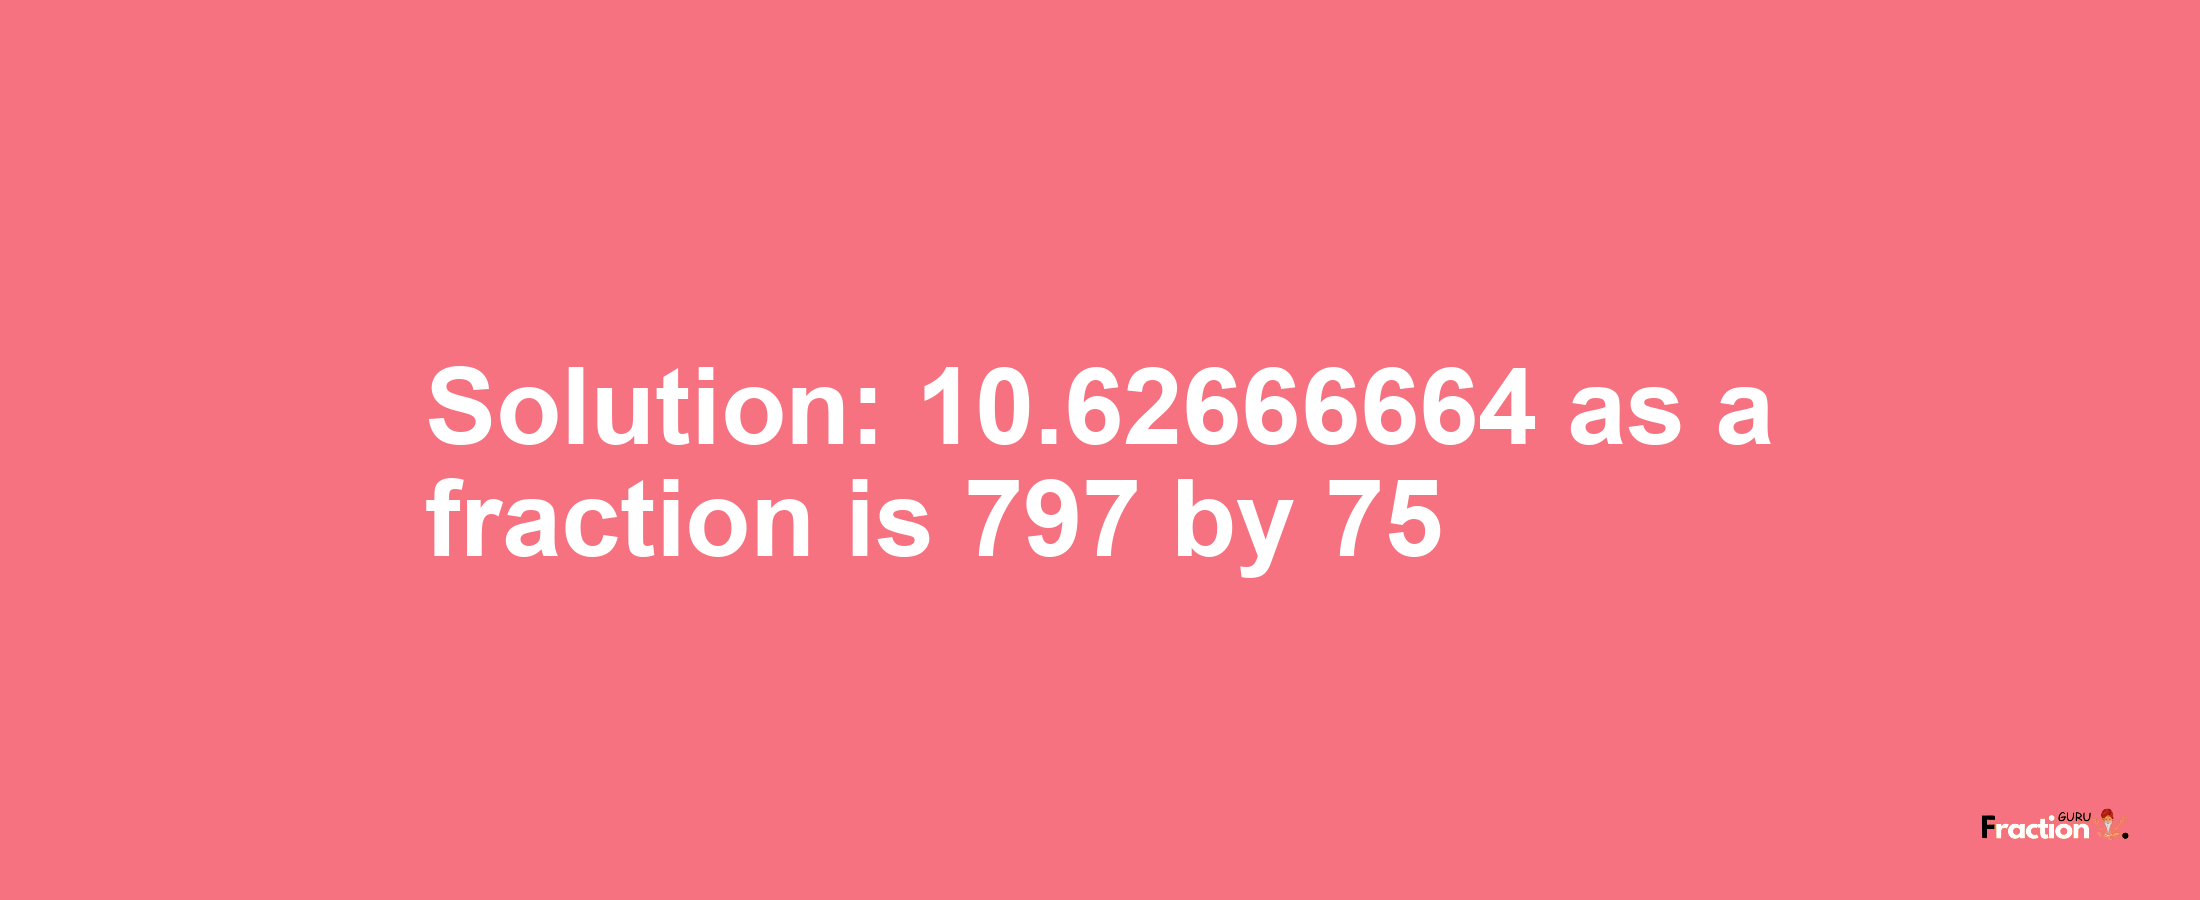 Solution:10.62666664 as a fraction is 797/75